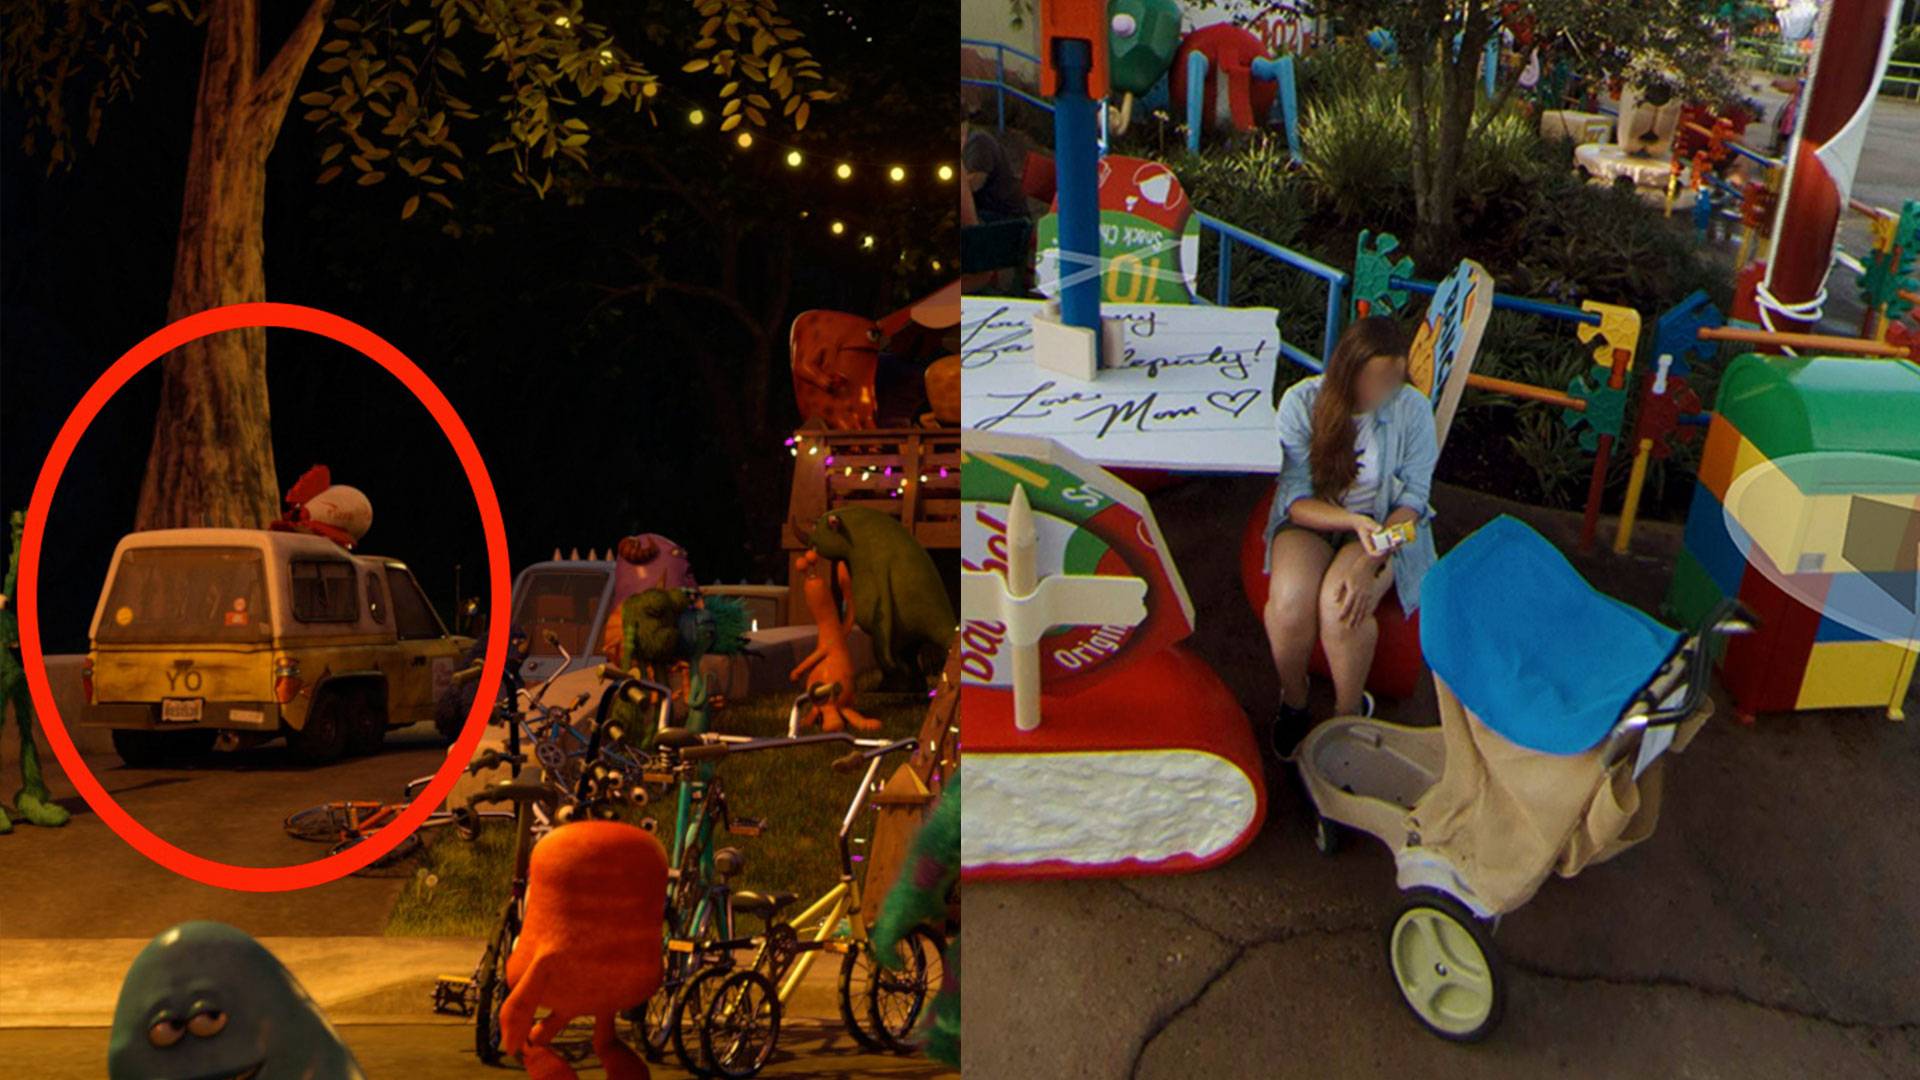 PHOTOS - Hidden Easter Eggs in Google Street View of Toy Story Land